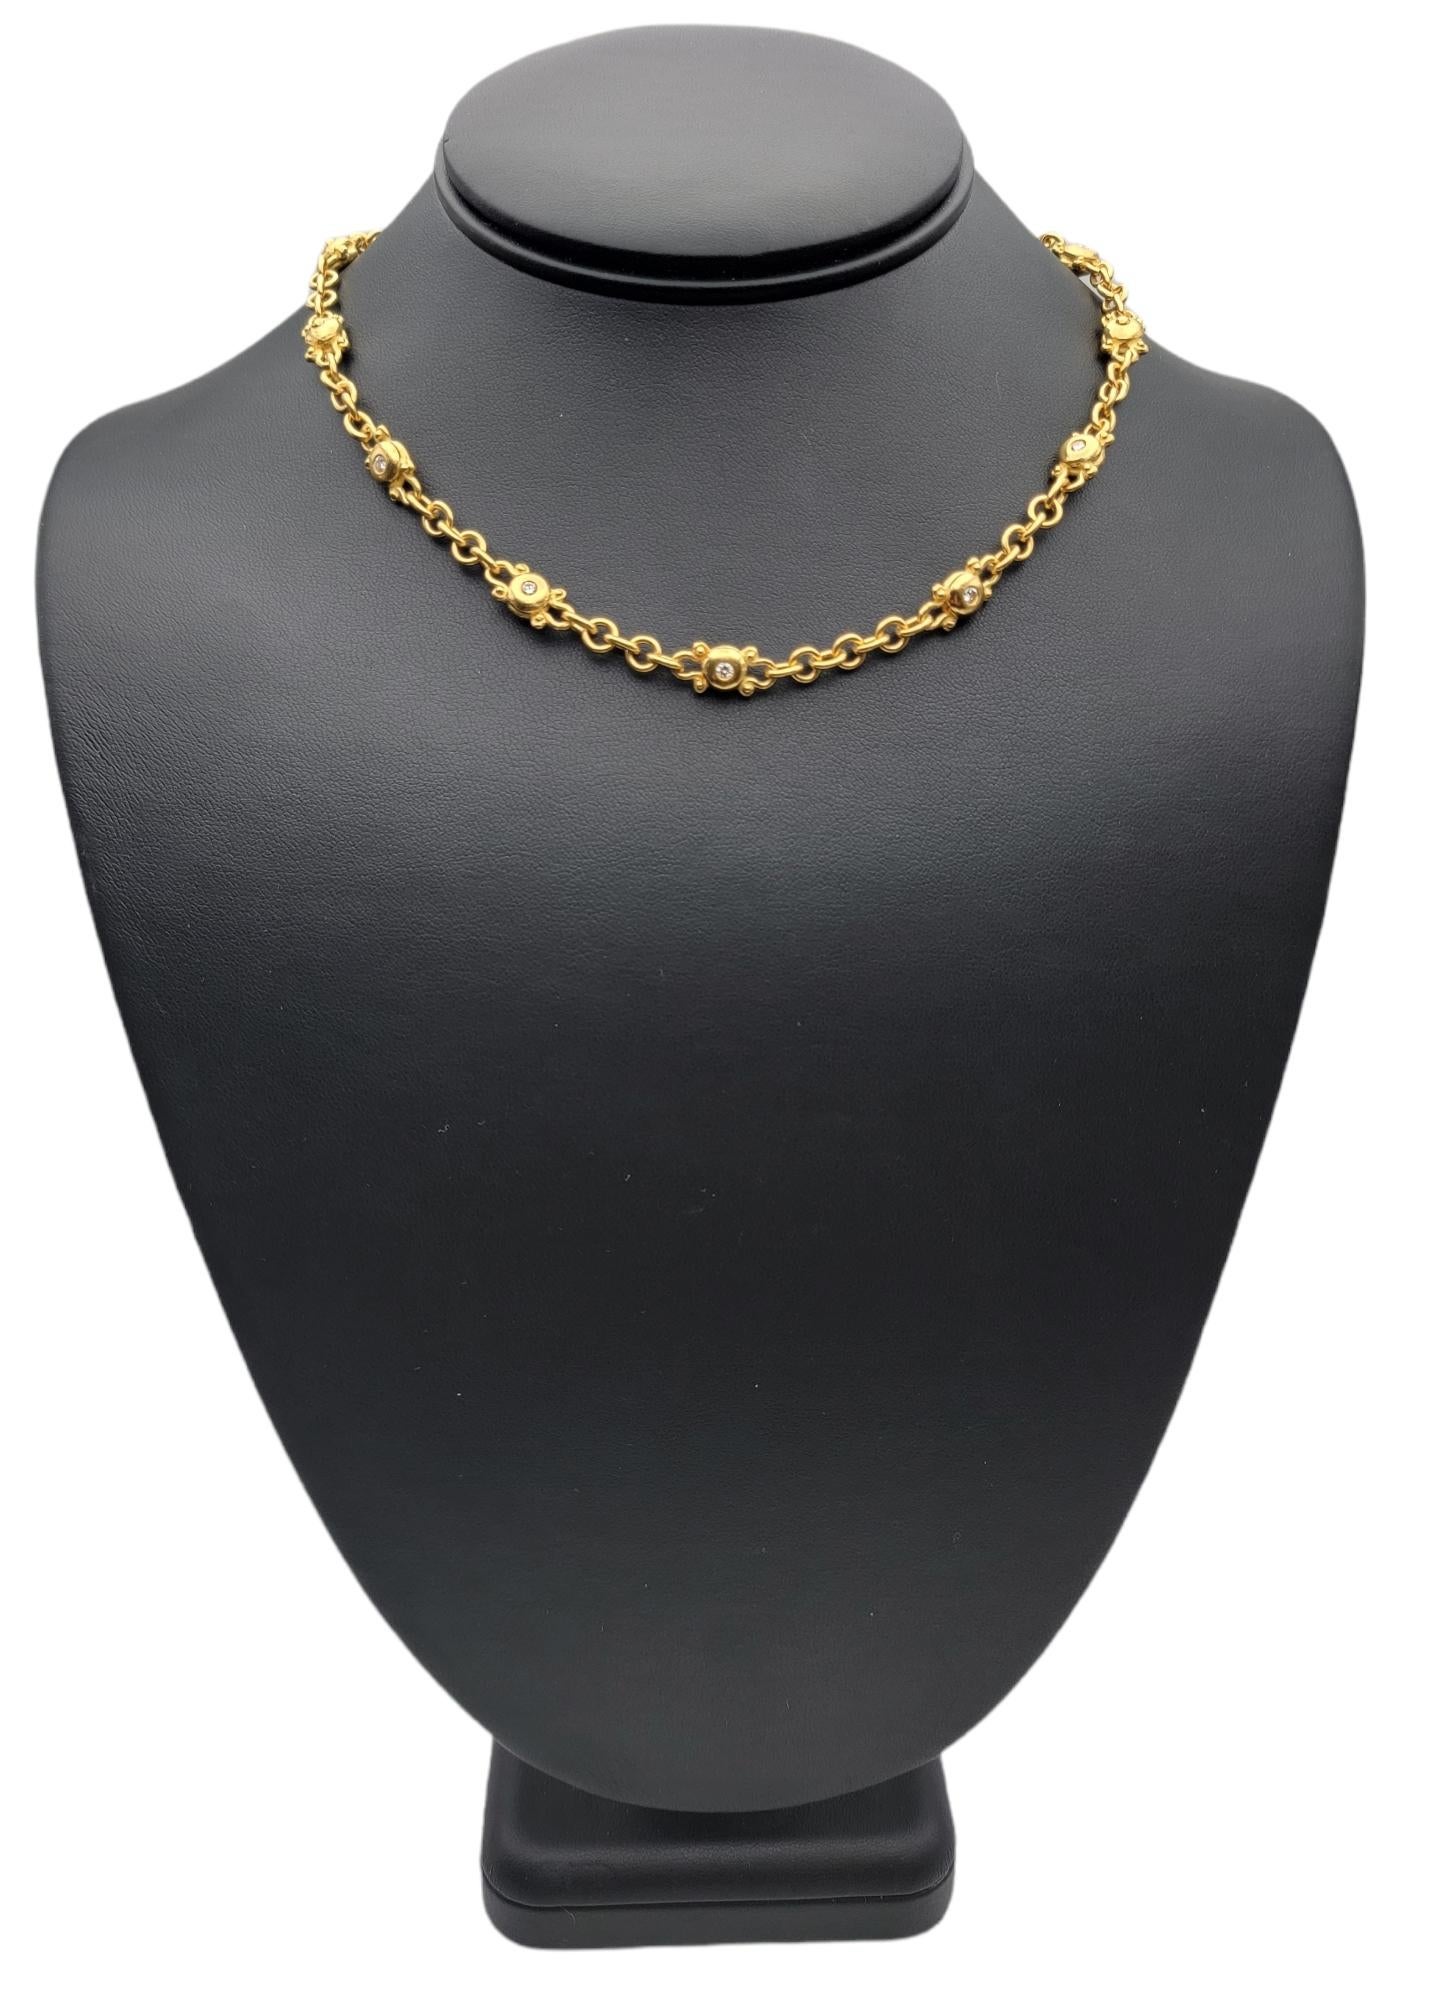 Denise Roberge 22 Karat Yellow Gold Bubble Link Necklace with Diamonds 2